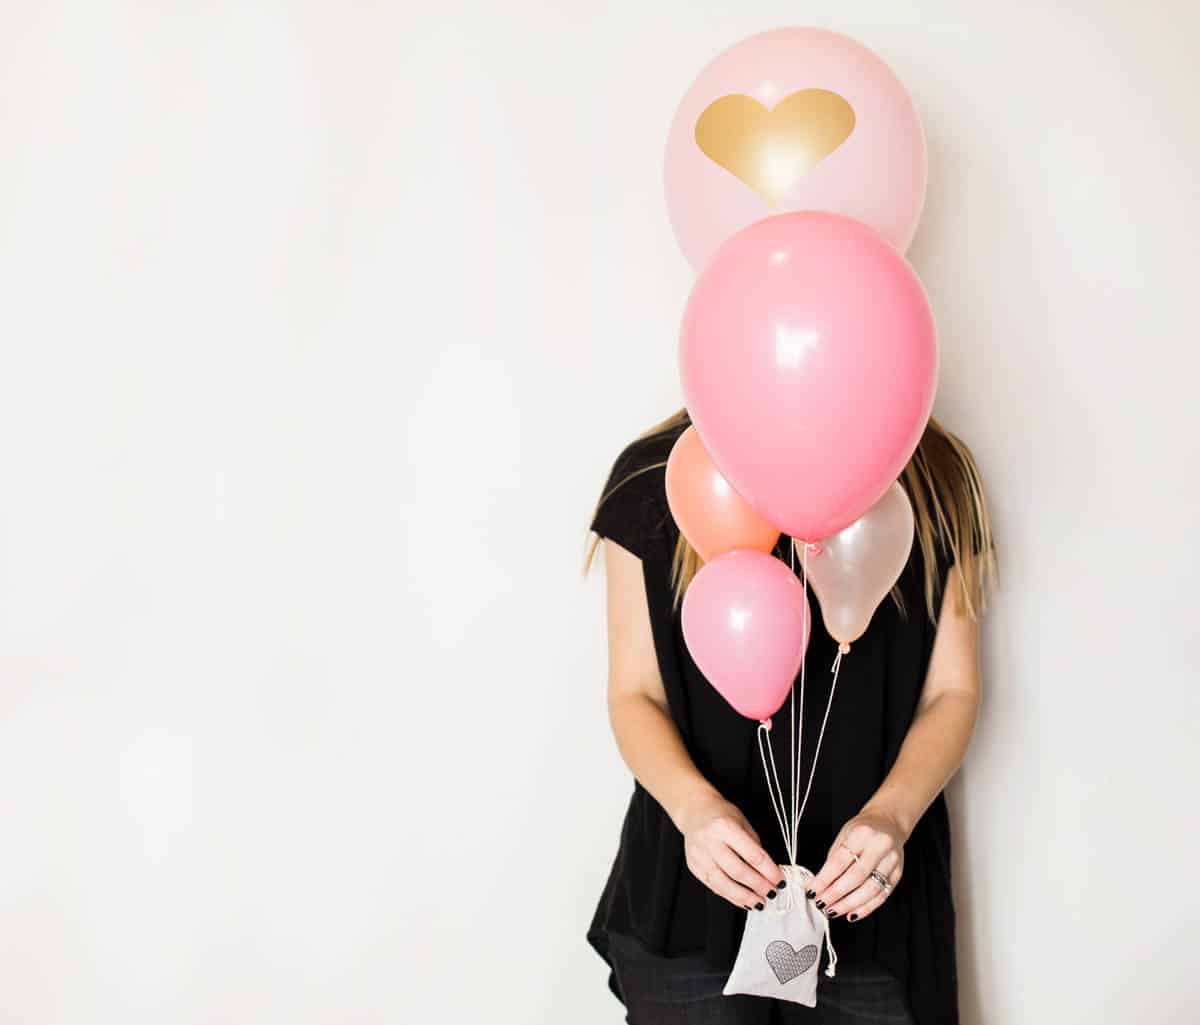 Woman holding a lavender sachet balloon weight attached to a pink balloon bouquet for Valentine's Day.